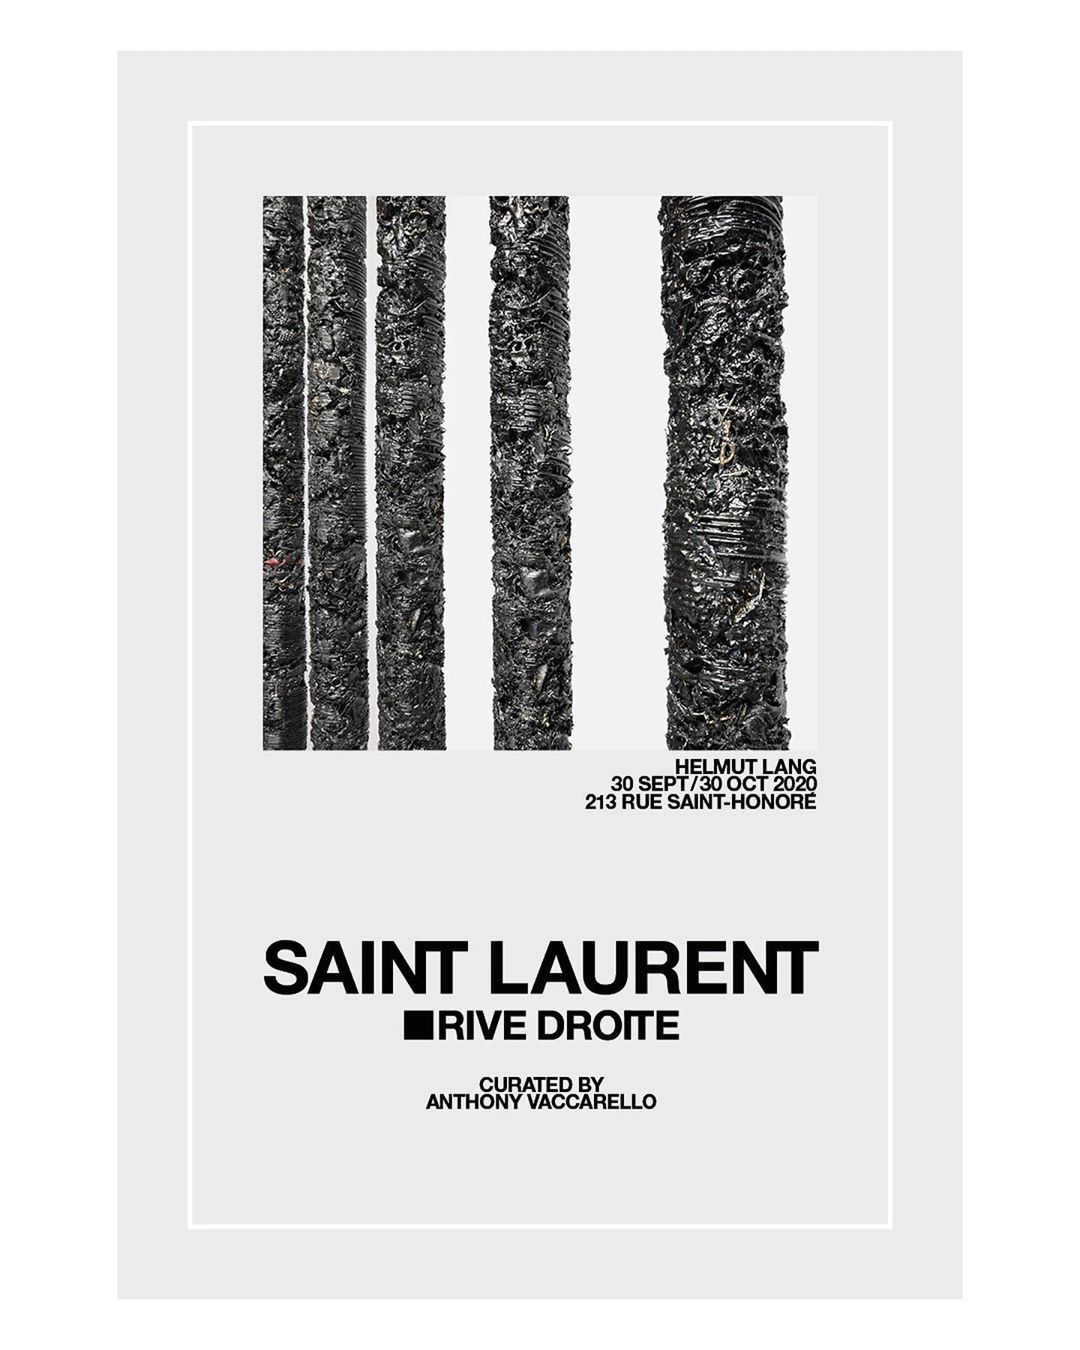 SAINT LAURENT - HELMUT LANG 
SAINT LAURENT RIVE DROITE
CURATED by ANTHONY VACCARELLO 

As part of the Saint Laurent Rive Droite project, Anthony Vaccarello has decided to give his creations to artist...